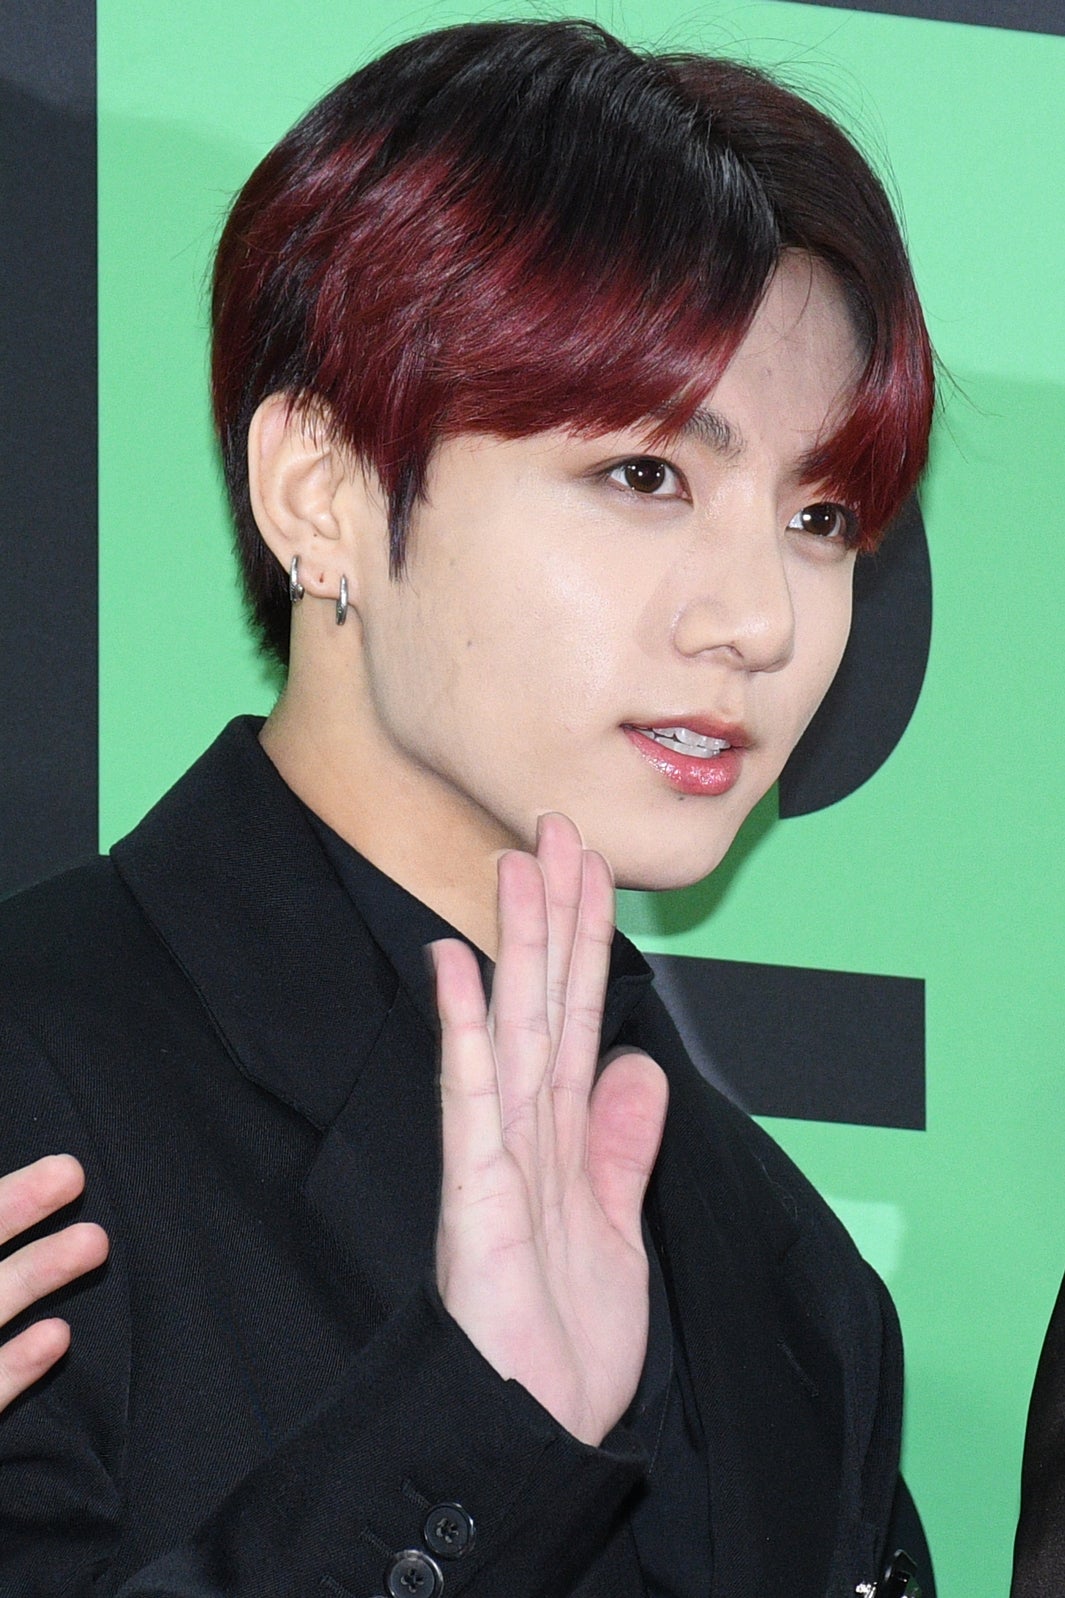 JUNG KOOK／Photo by Getty Images